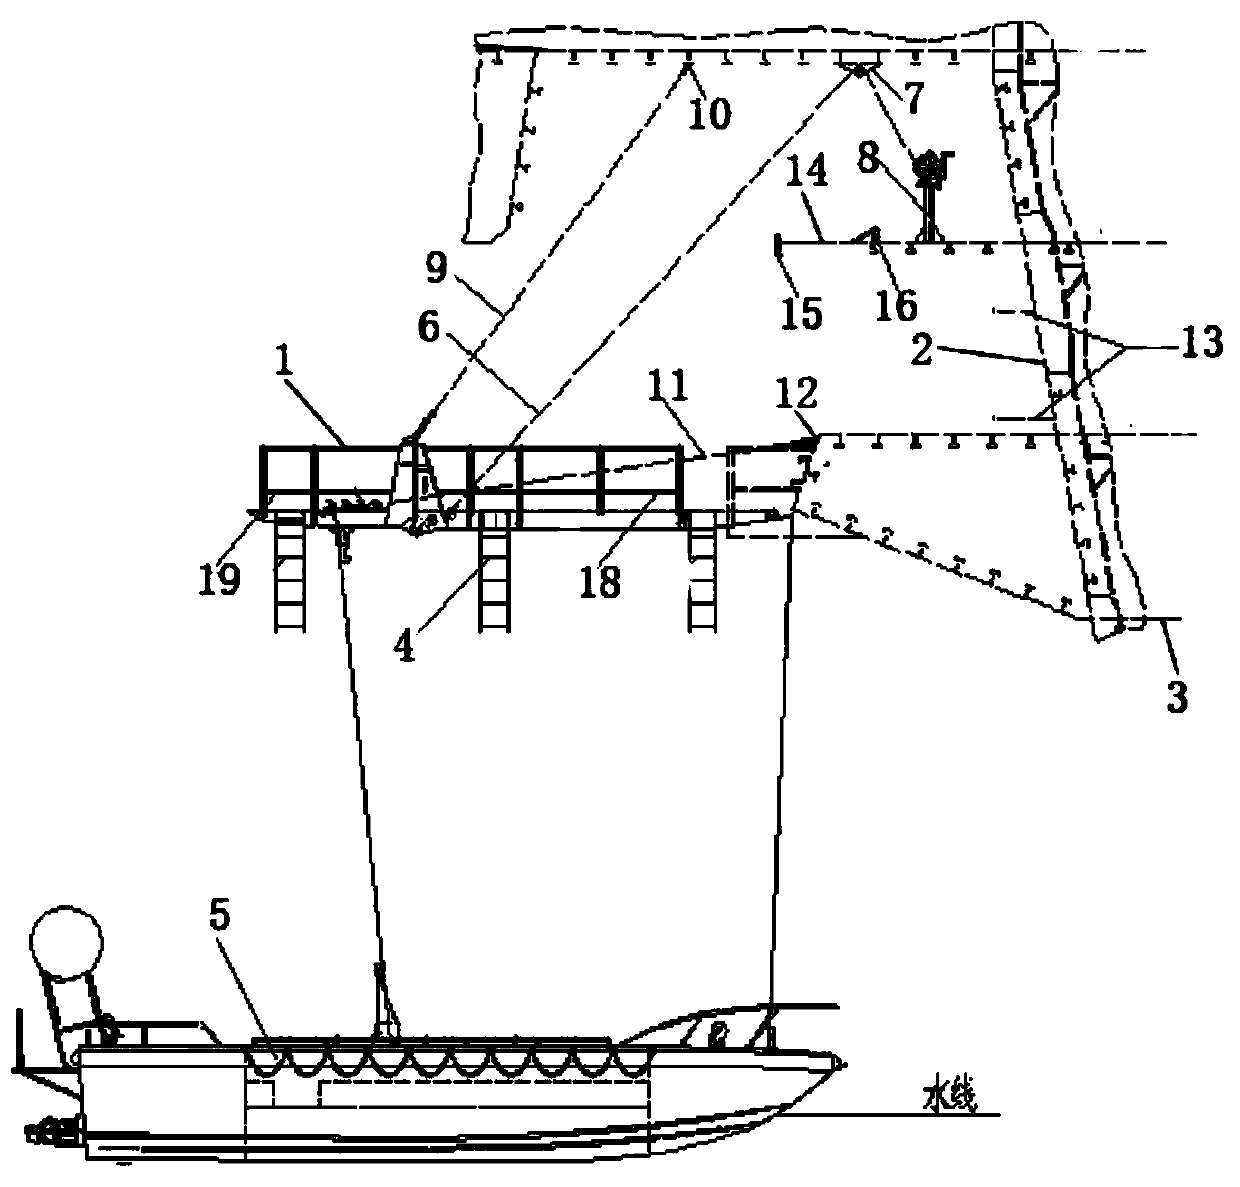 Long-span embarkation device for large ship